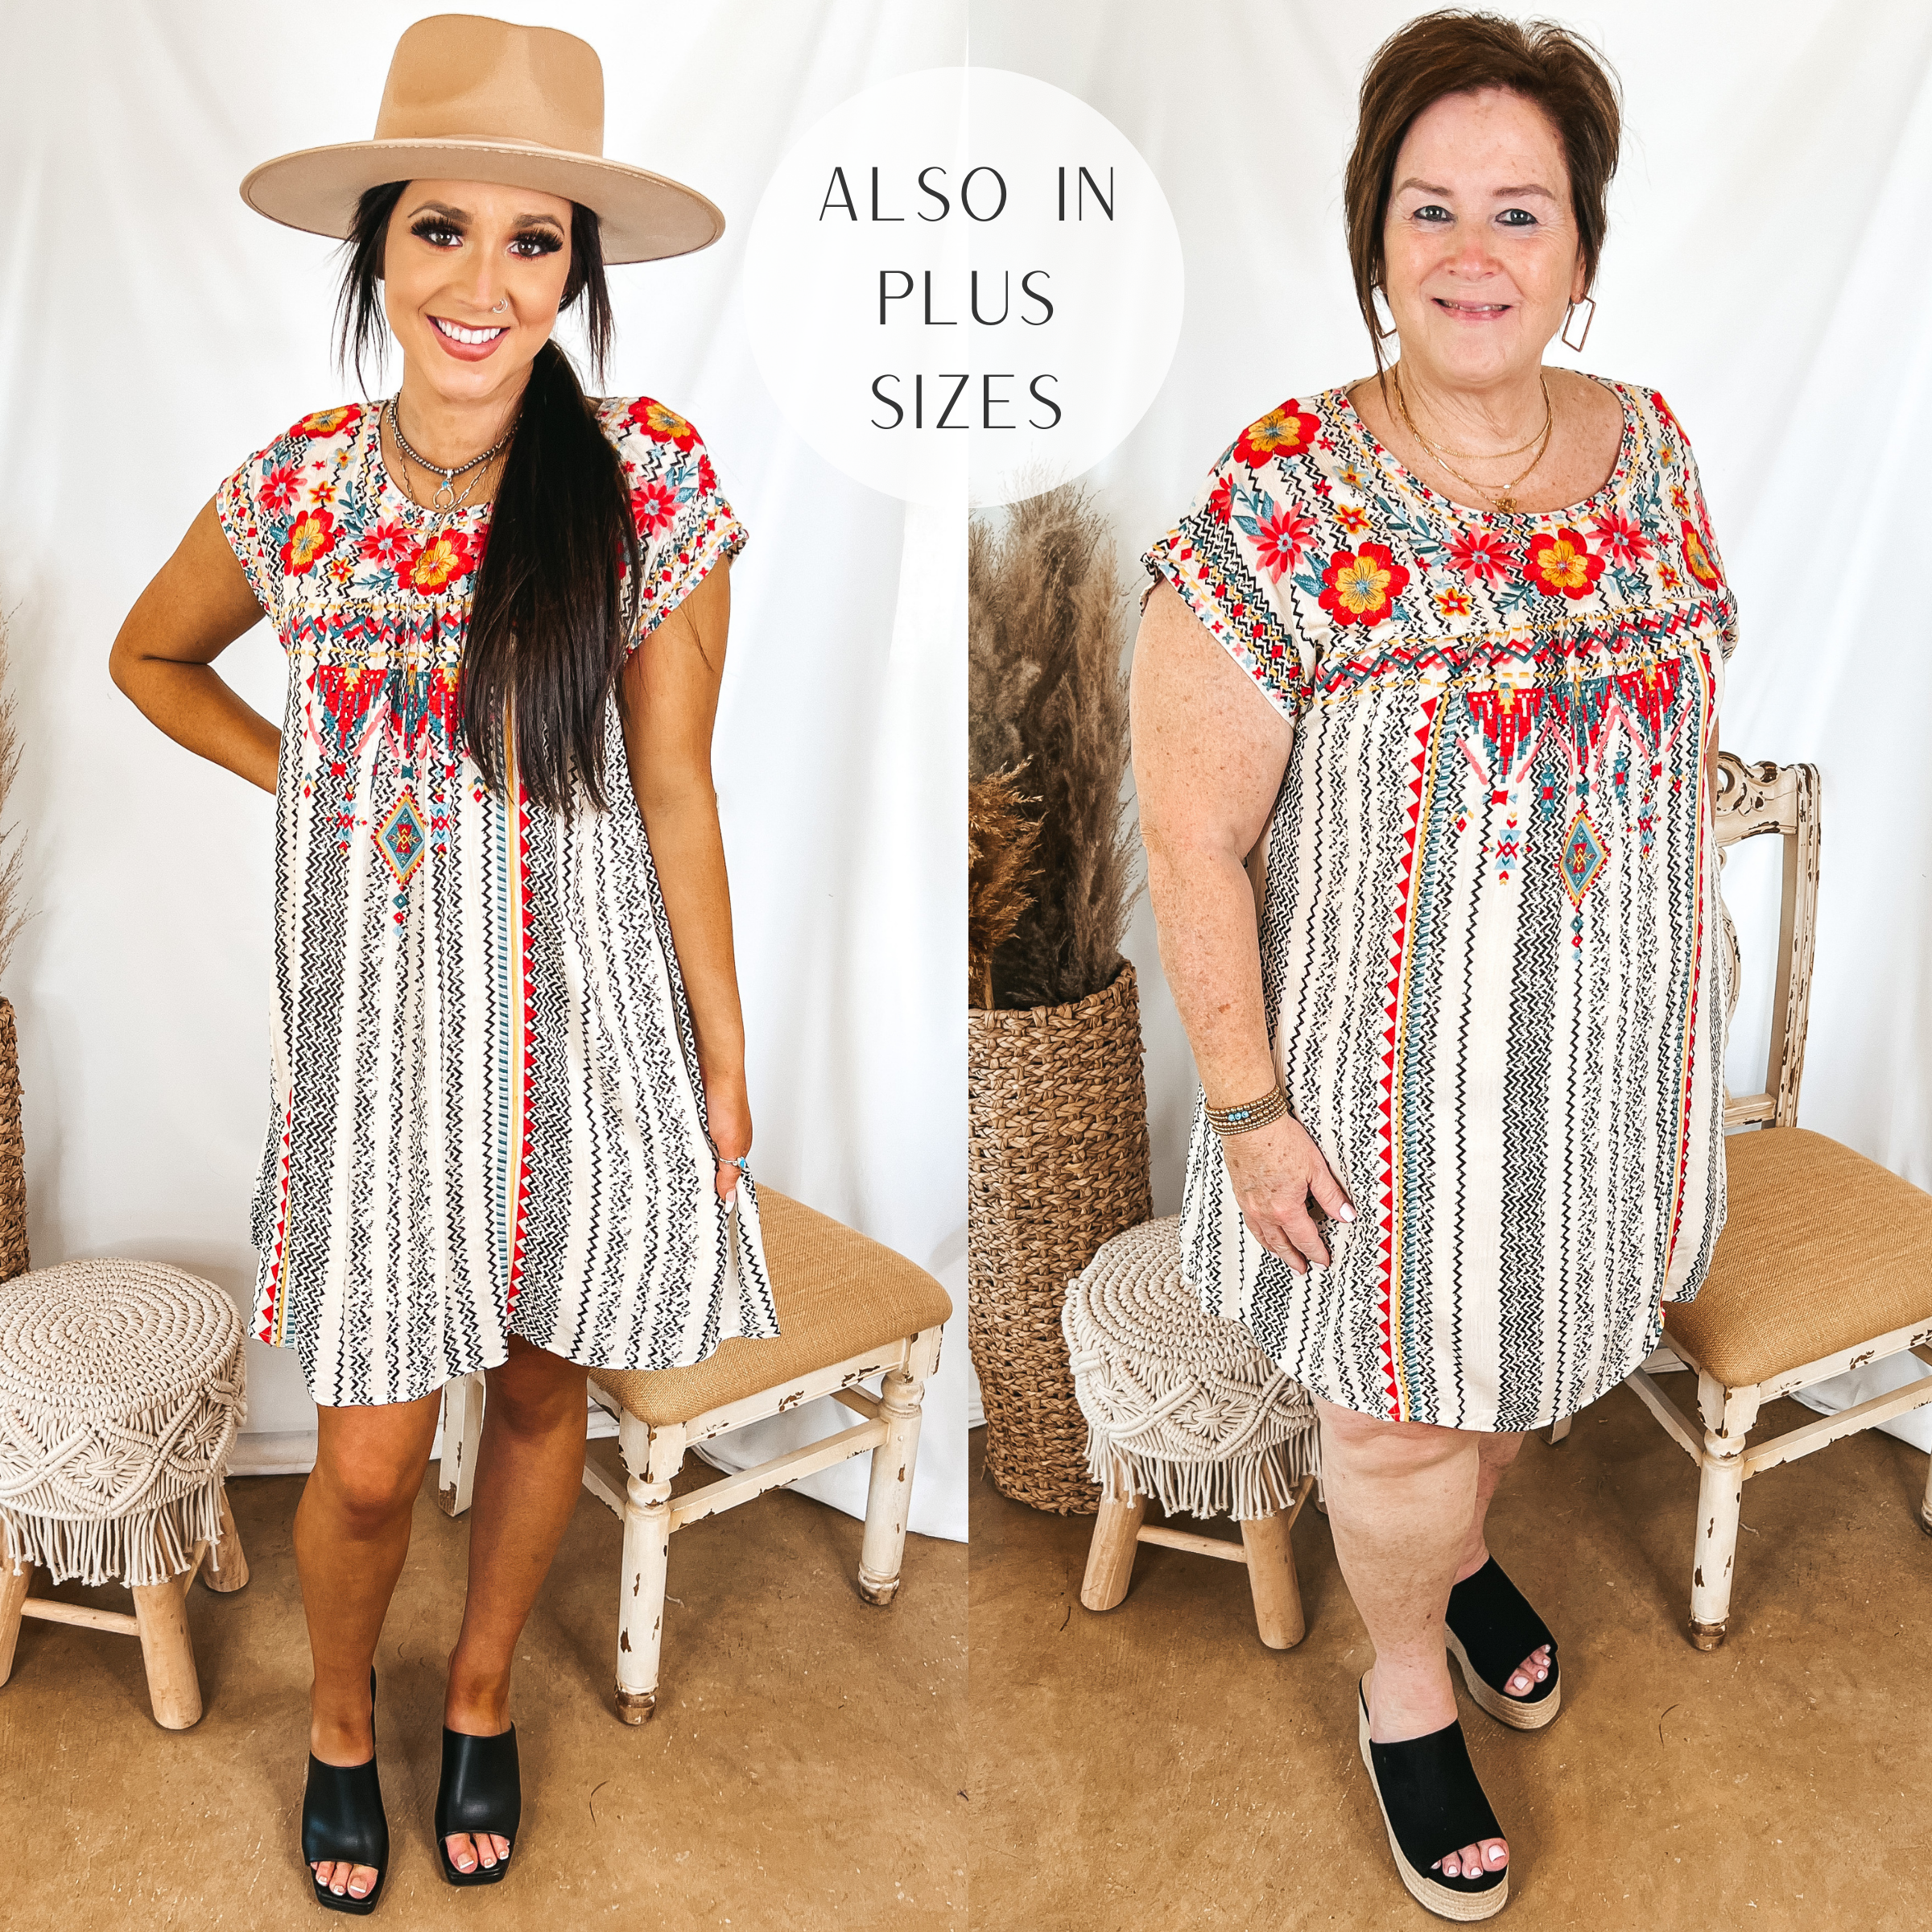 Models are wearing a black and white stripe dress with floral embroidery on the front. Size small model has it paired with black heels and a tan hat. Size large model has it paired with black wedges and gold jewelry.